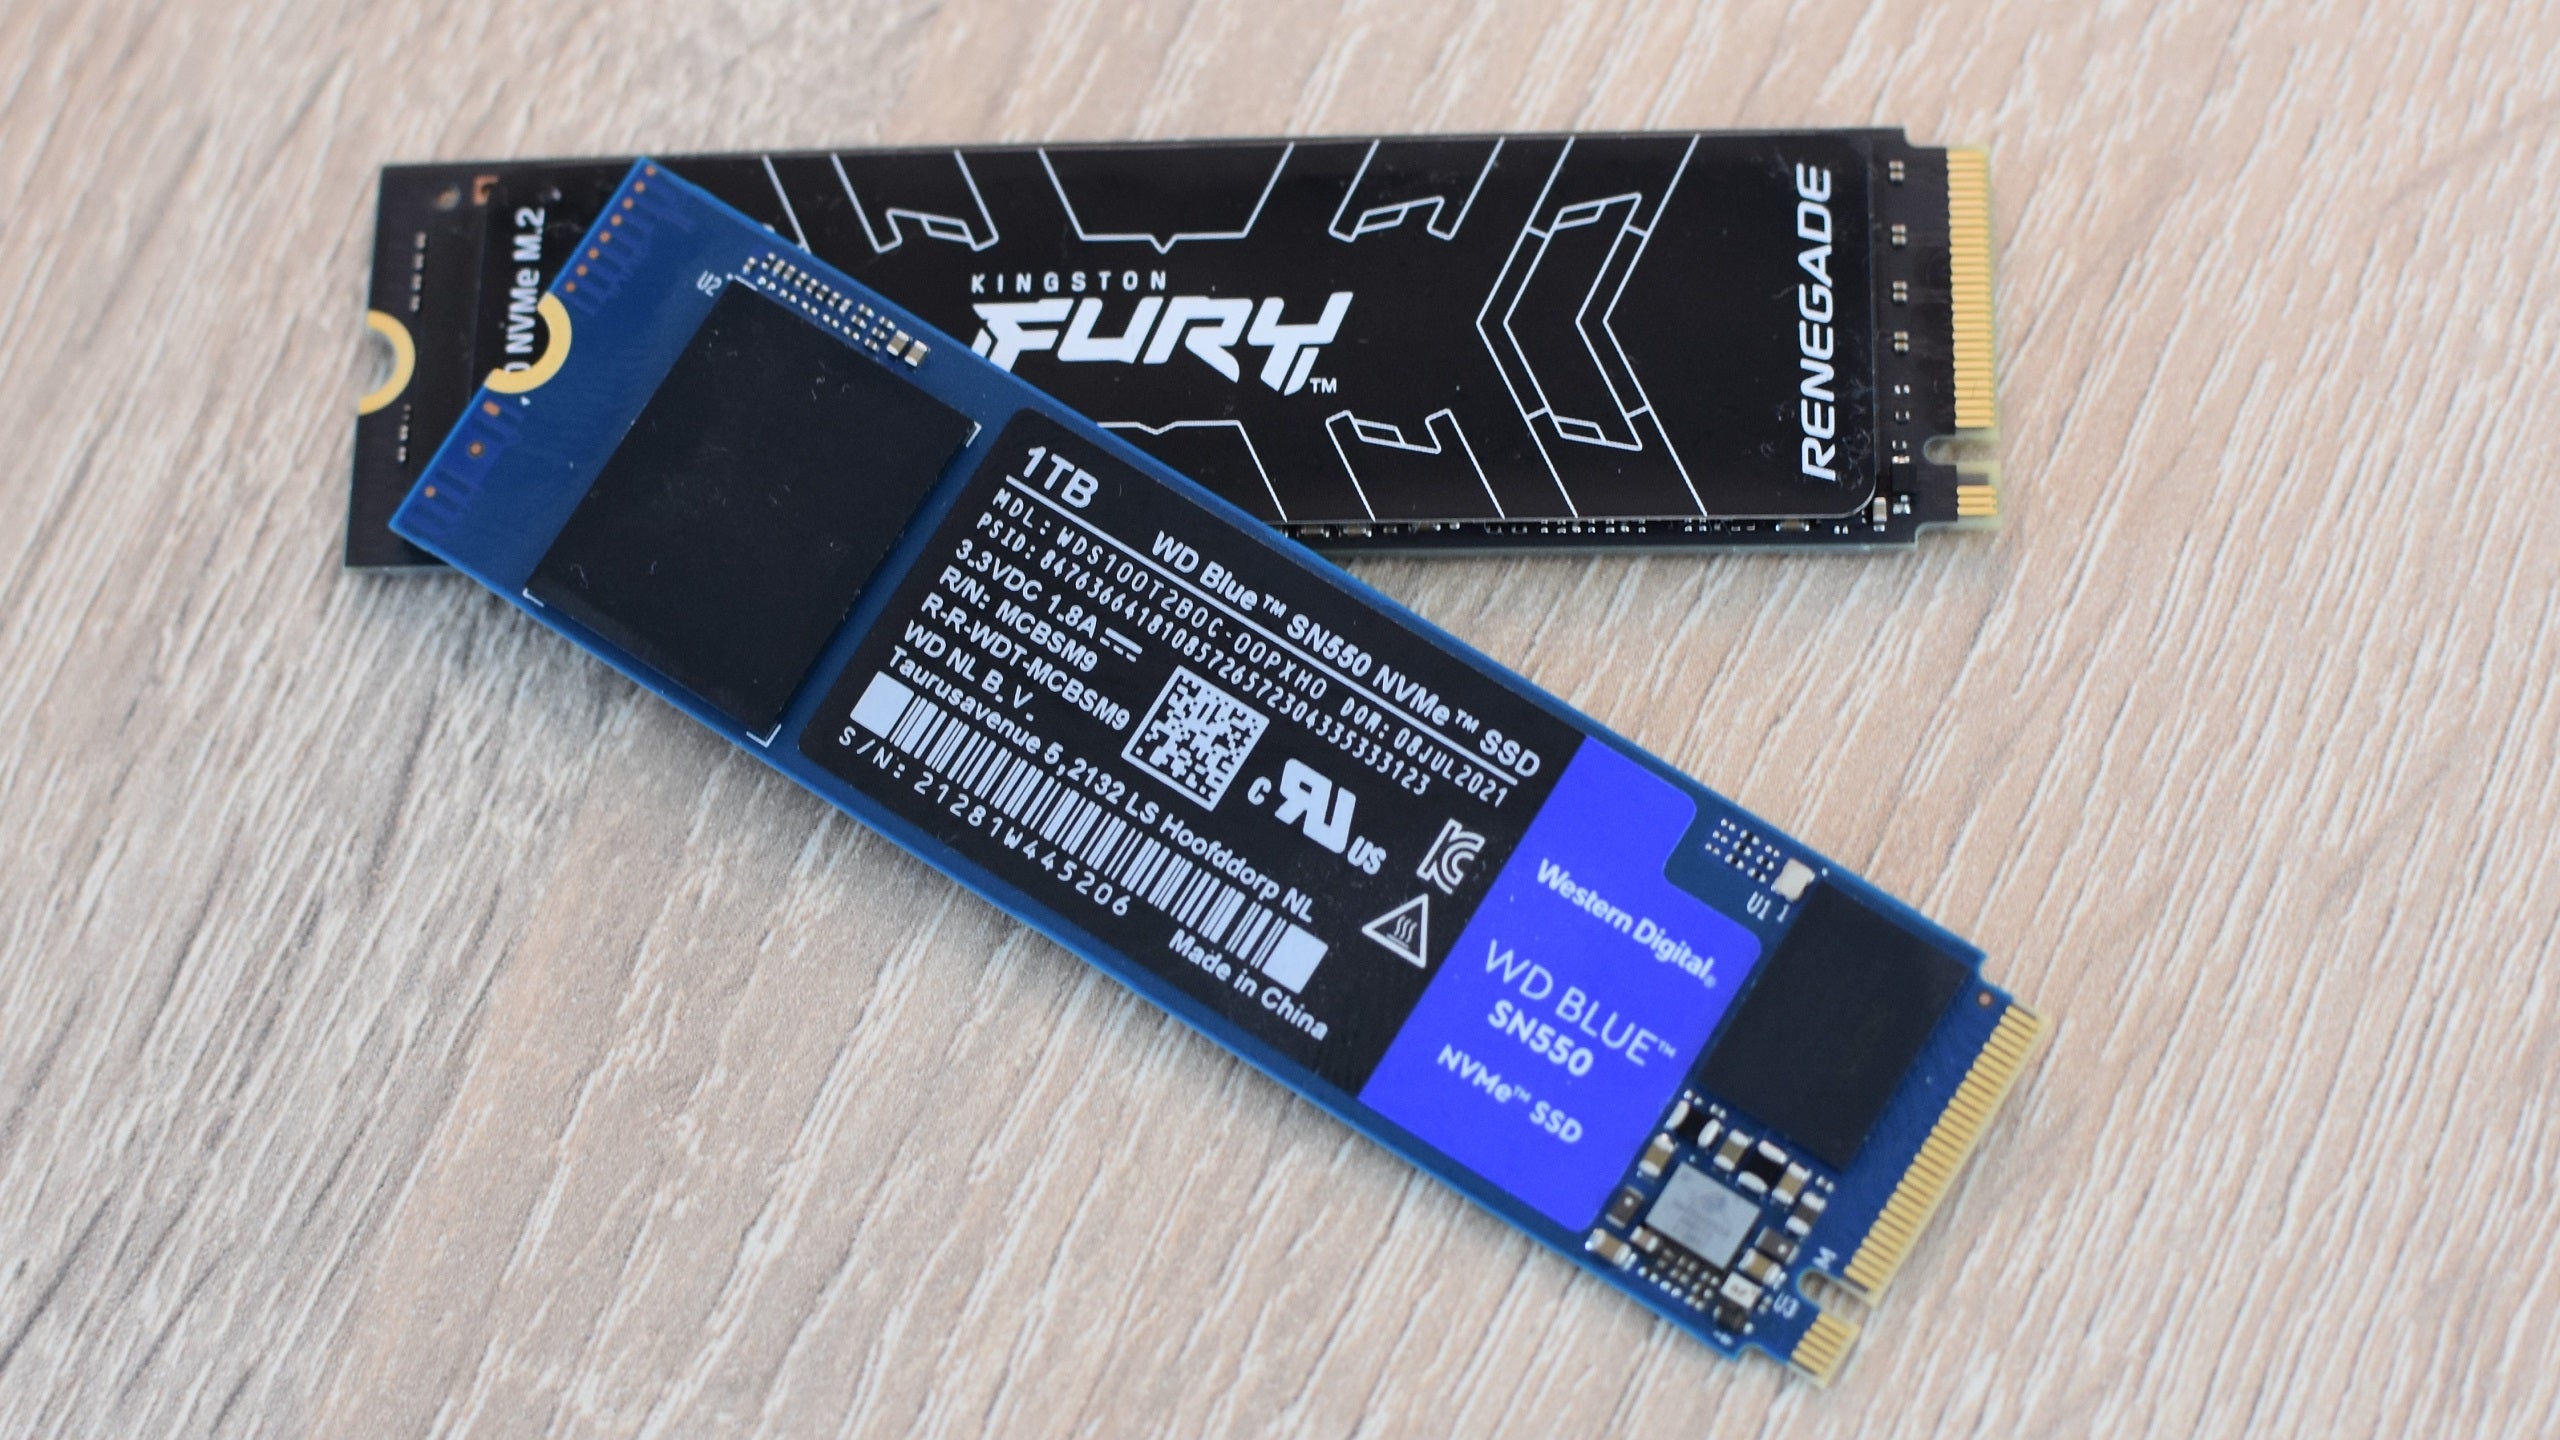 Two NVMe SSDs, the Kingston Fury Renegade and WD Blue SN550, on a desk.